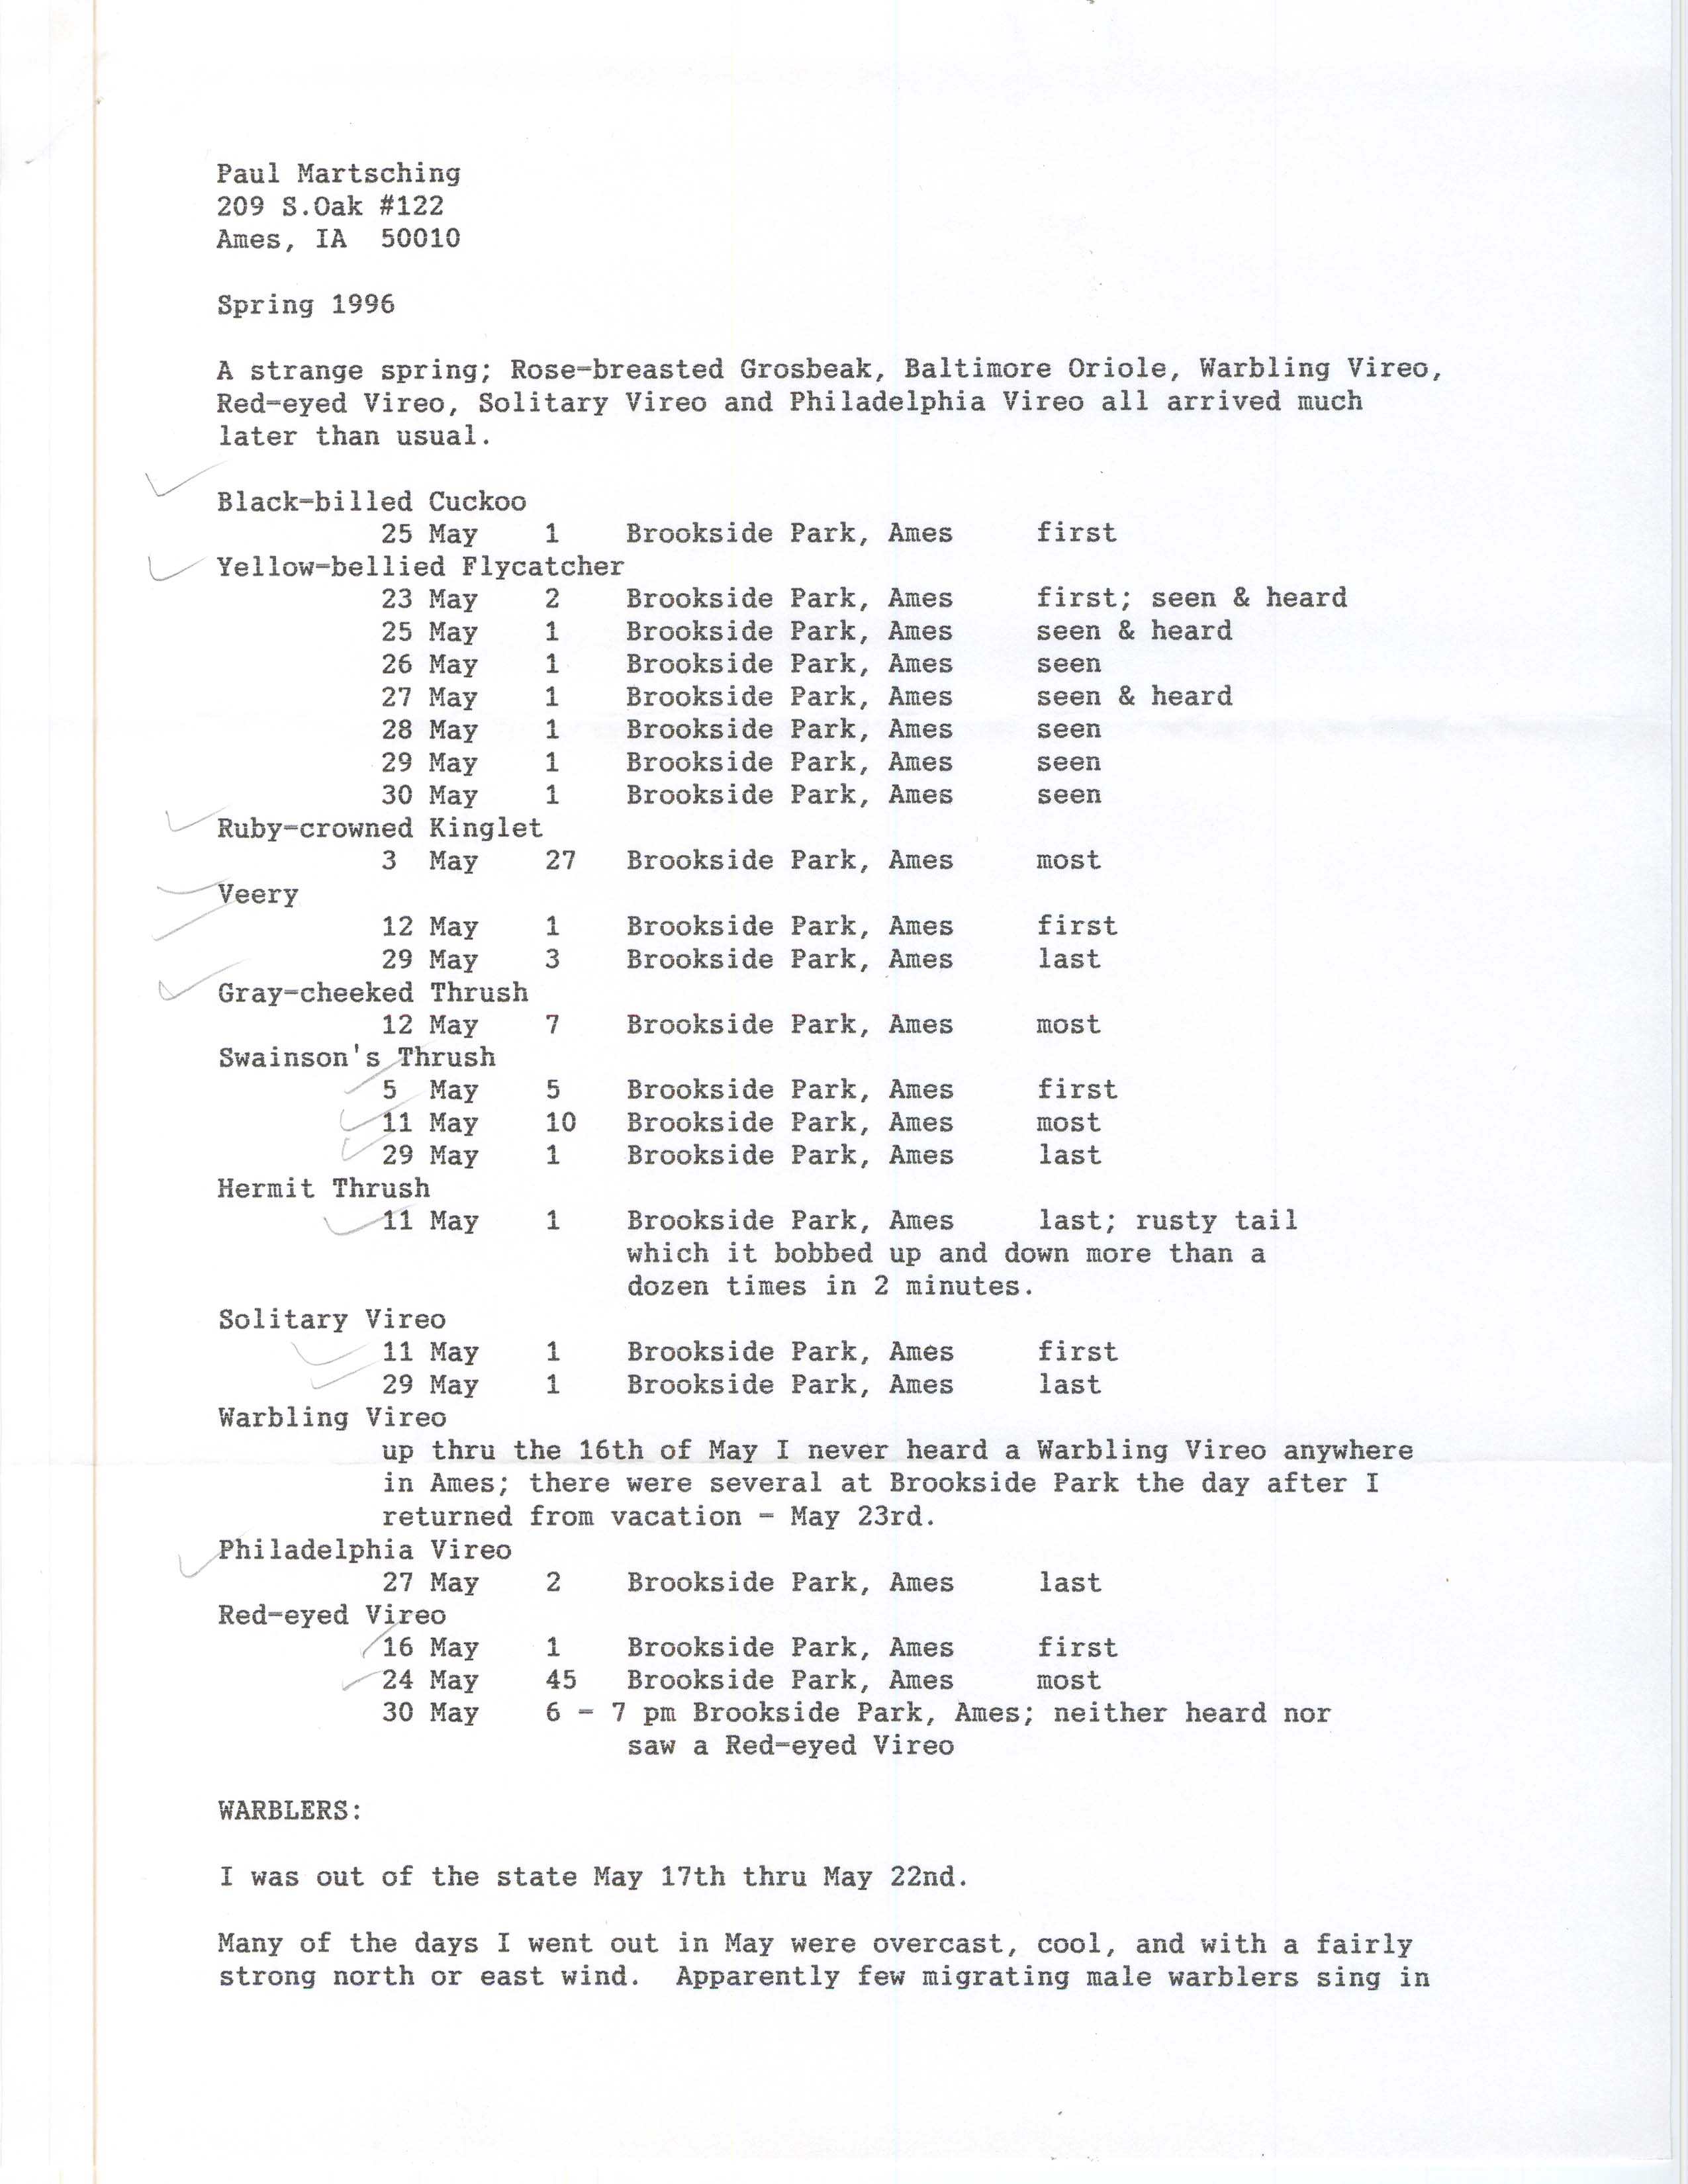 Field notes contributed by Paul Martsching, spring 1996